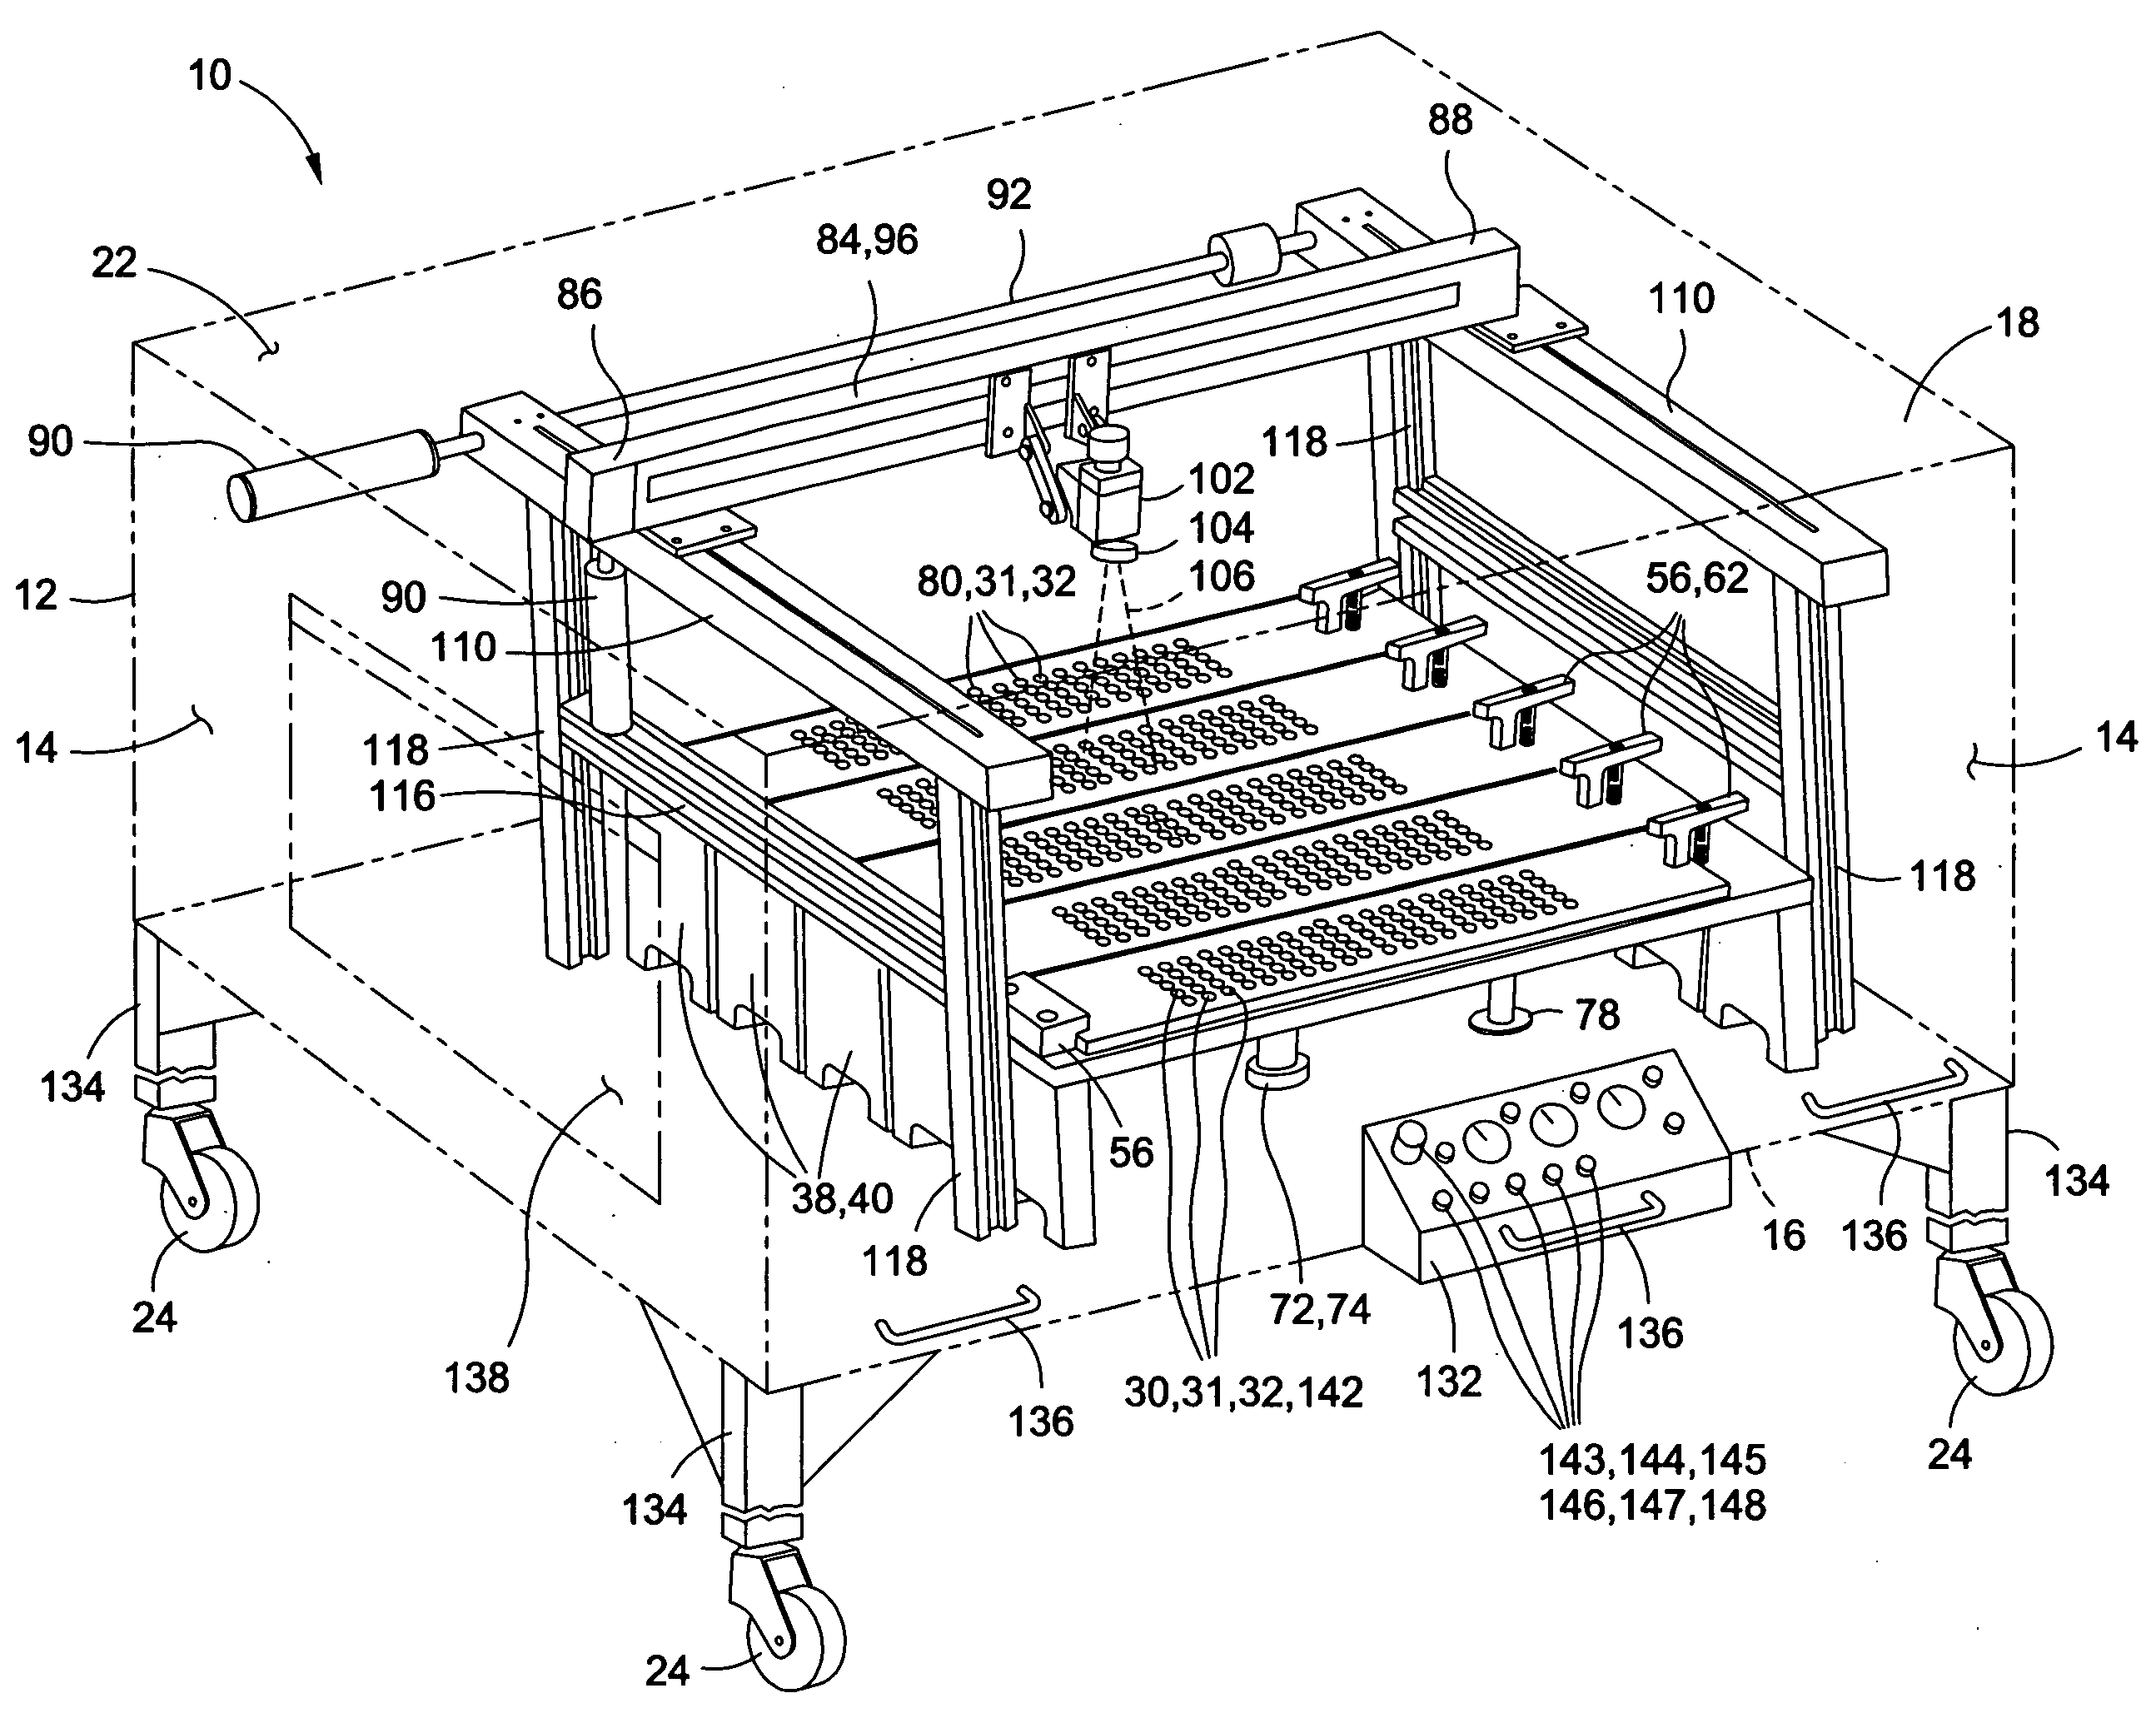 Controlled environment fastener head painting device and method